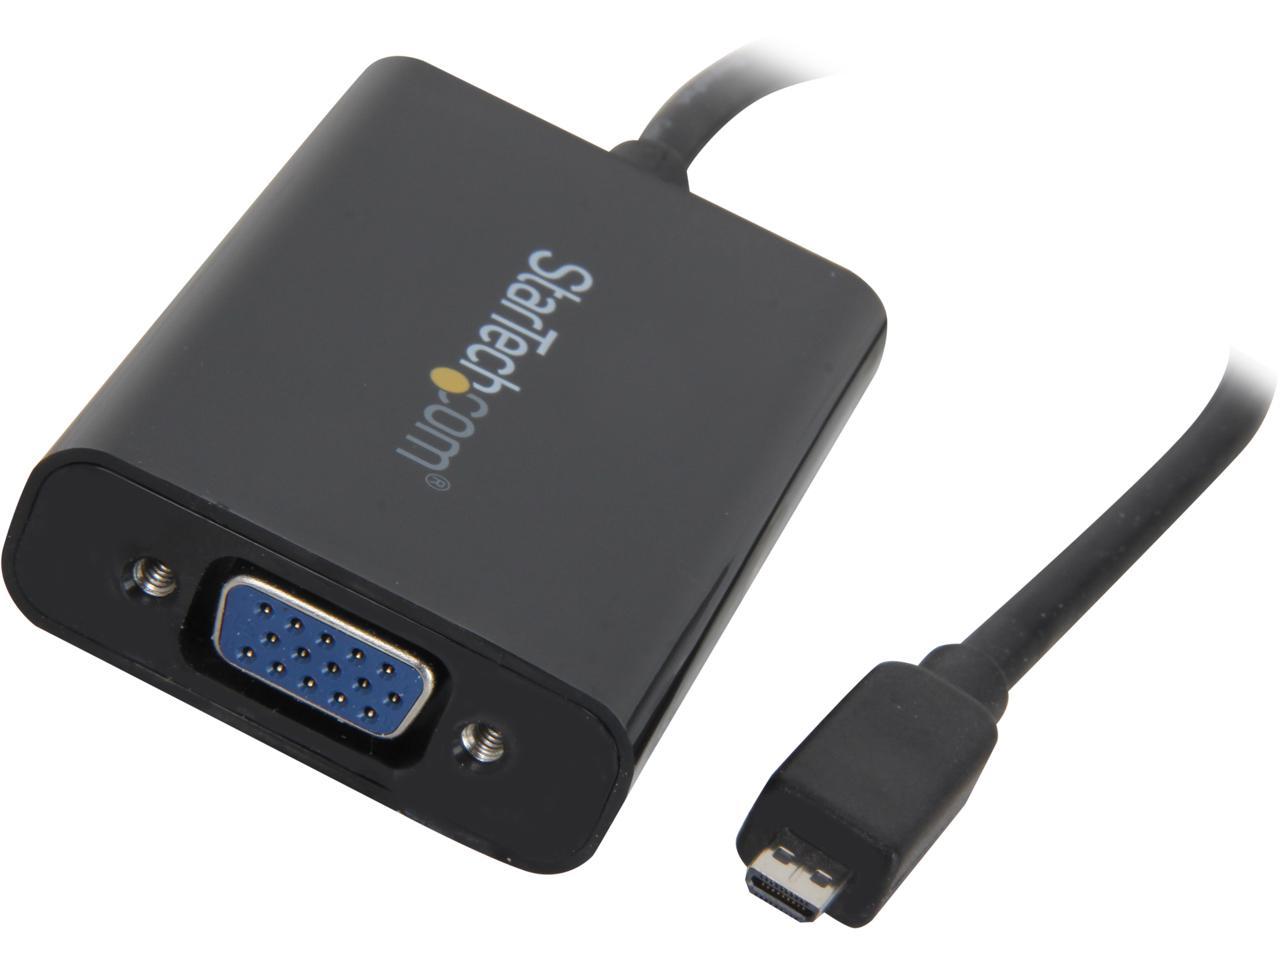 StarTech.com MCHD2VGAA2 Micro HDMI to VGA Adapter Converter with Audio for Smartphones / Ultrabooks / Tablets - 1920x1200 - image 1 of 3